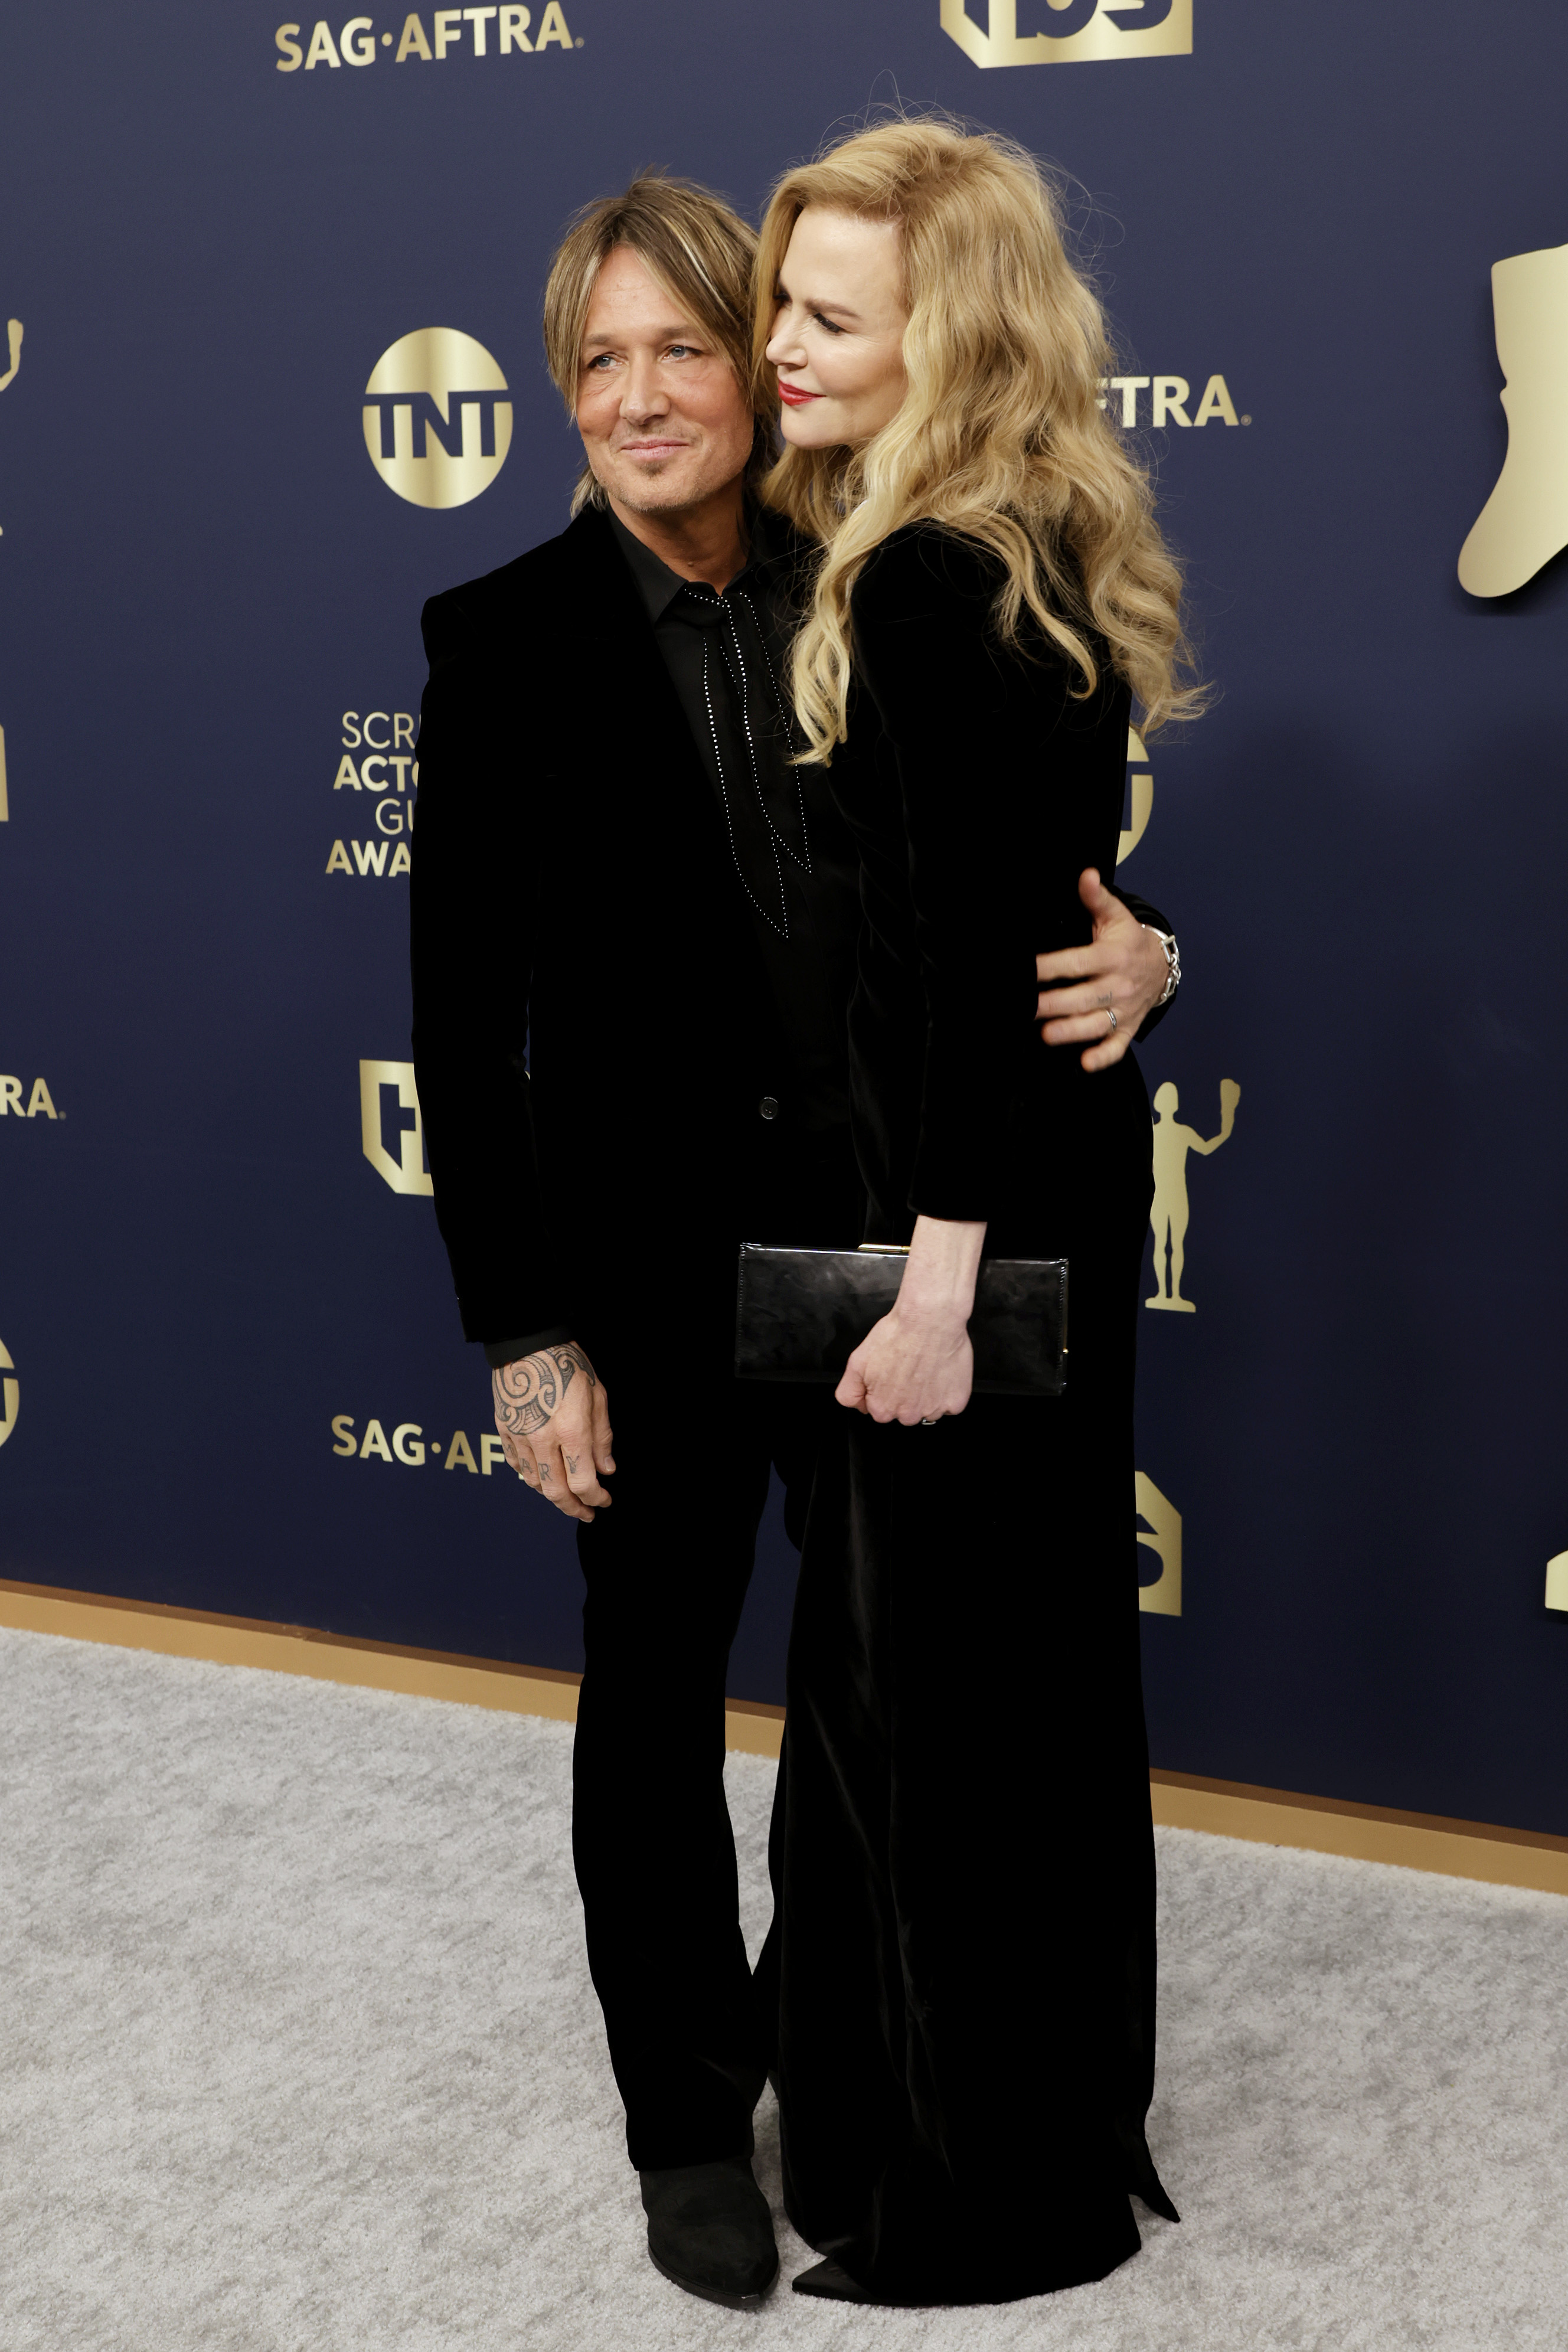 Keith Urban and Nicole Kidman at the 28th Annual Screen Actors Guild Awards | Source: Getty Images